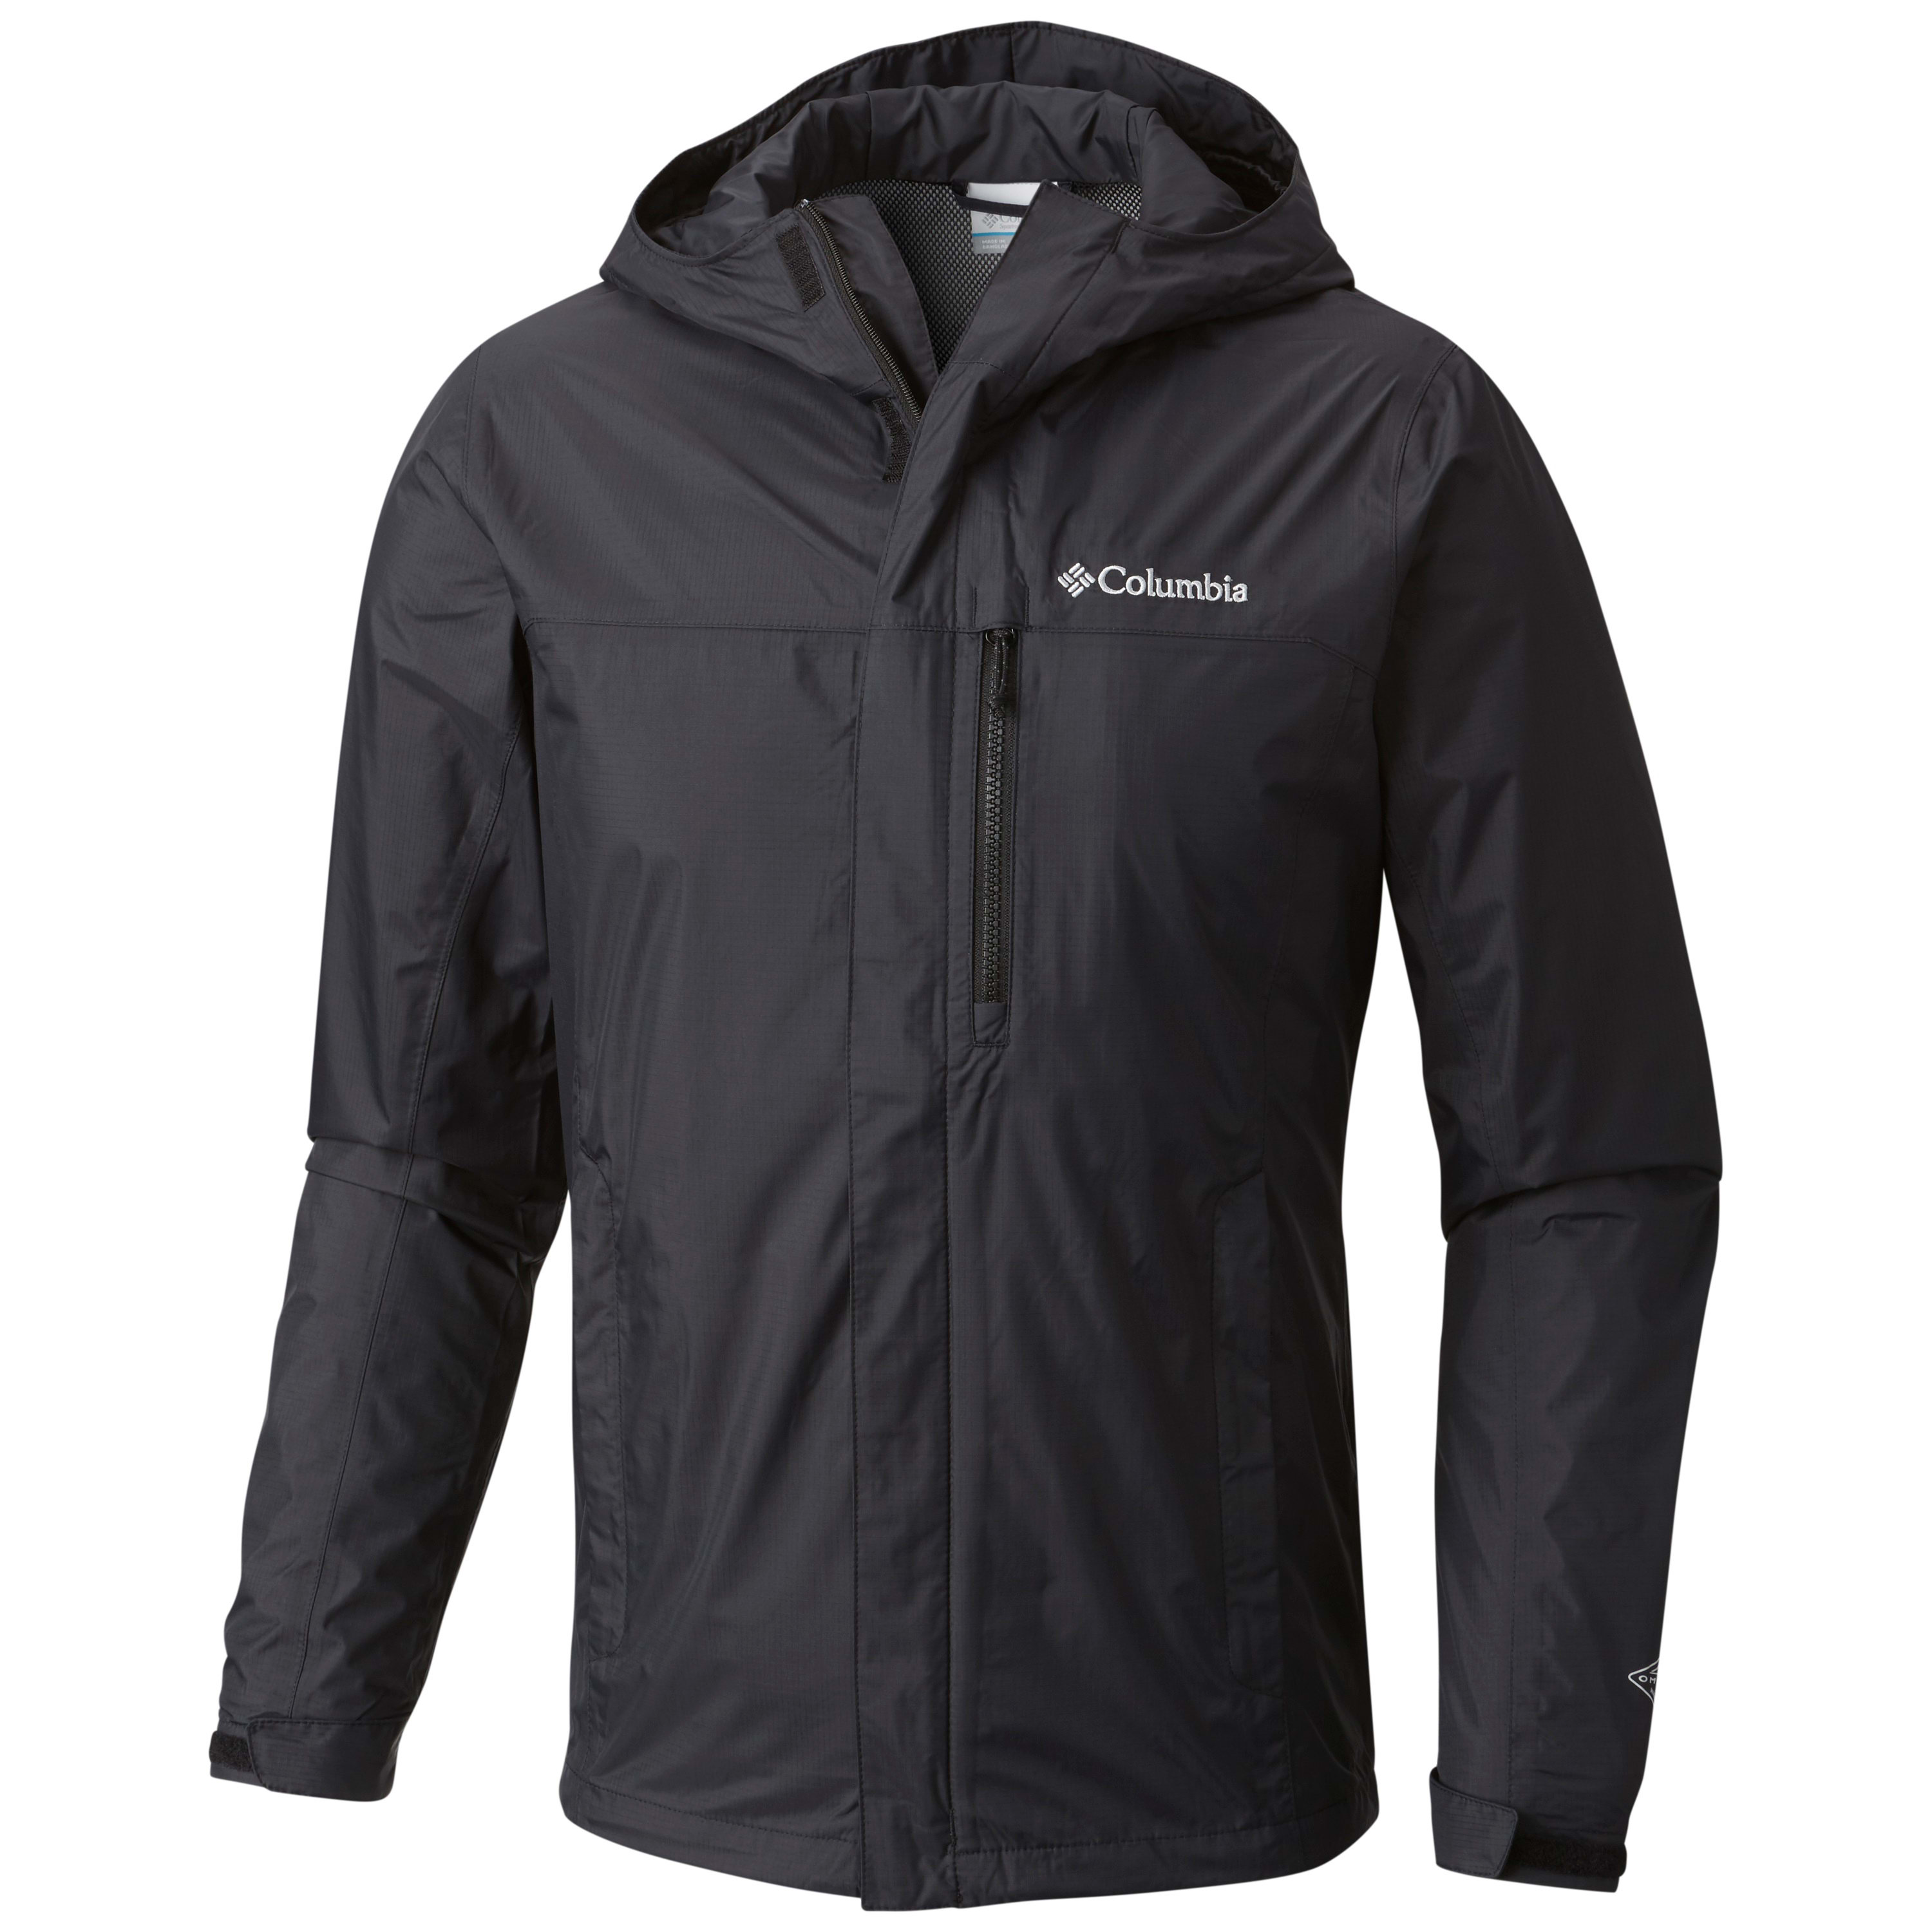 Buy Columbia Men's Pouring Adventure II Jacket from Outnorth